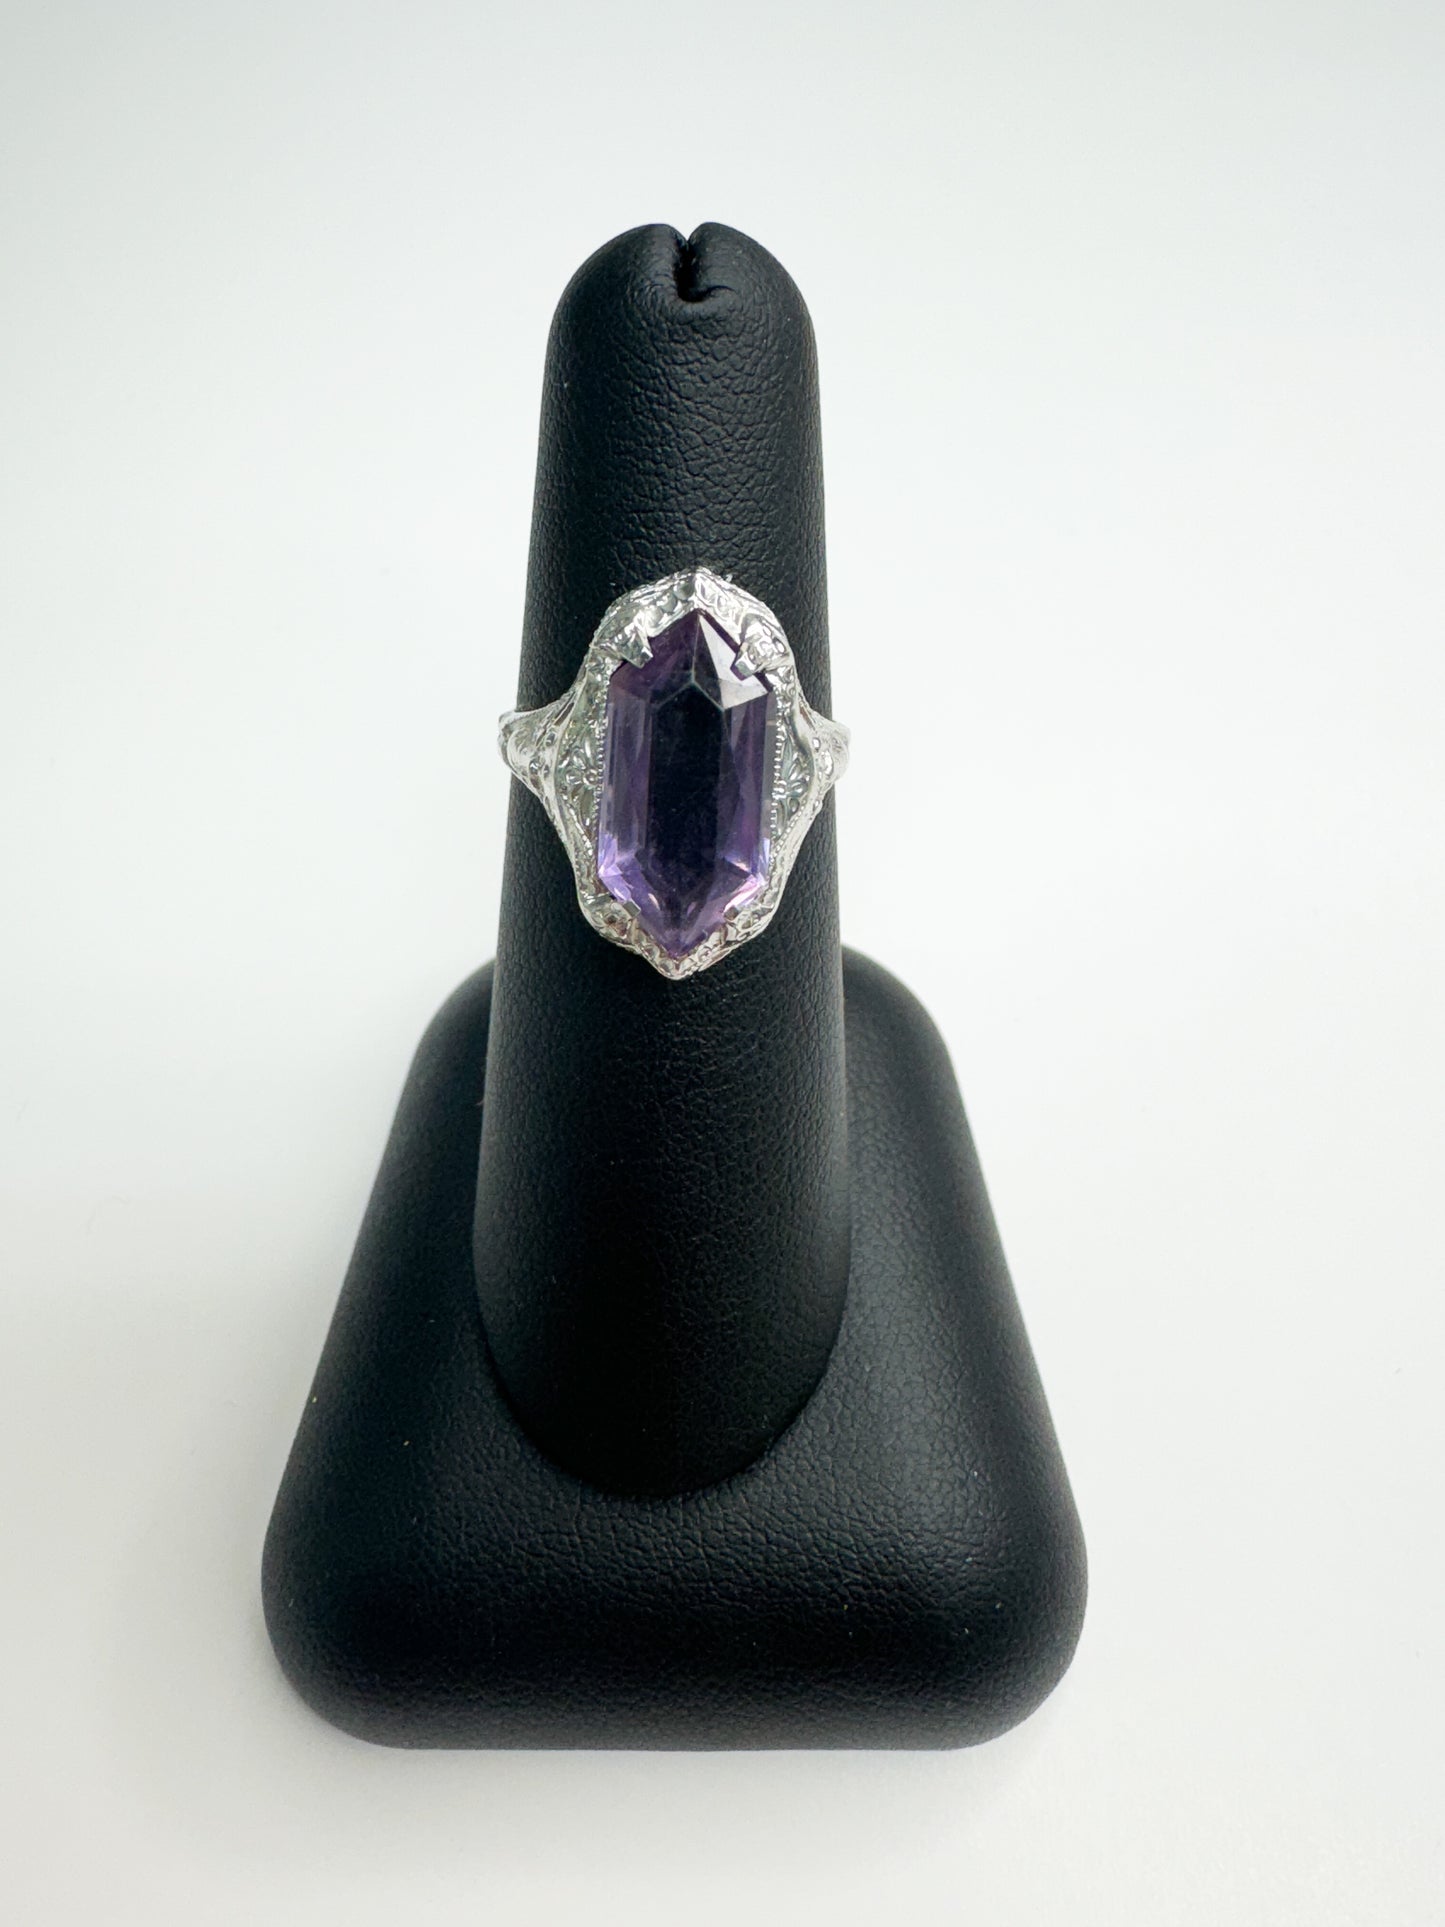 Antique 10K White Gold and Amethyst ring